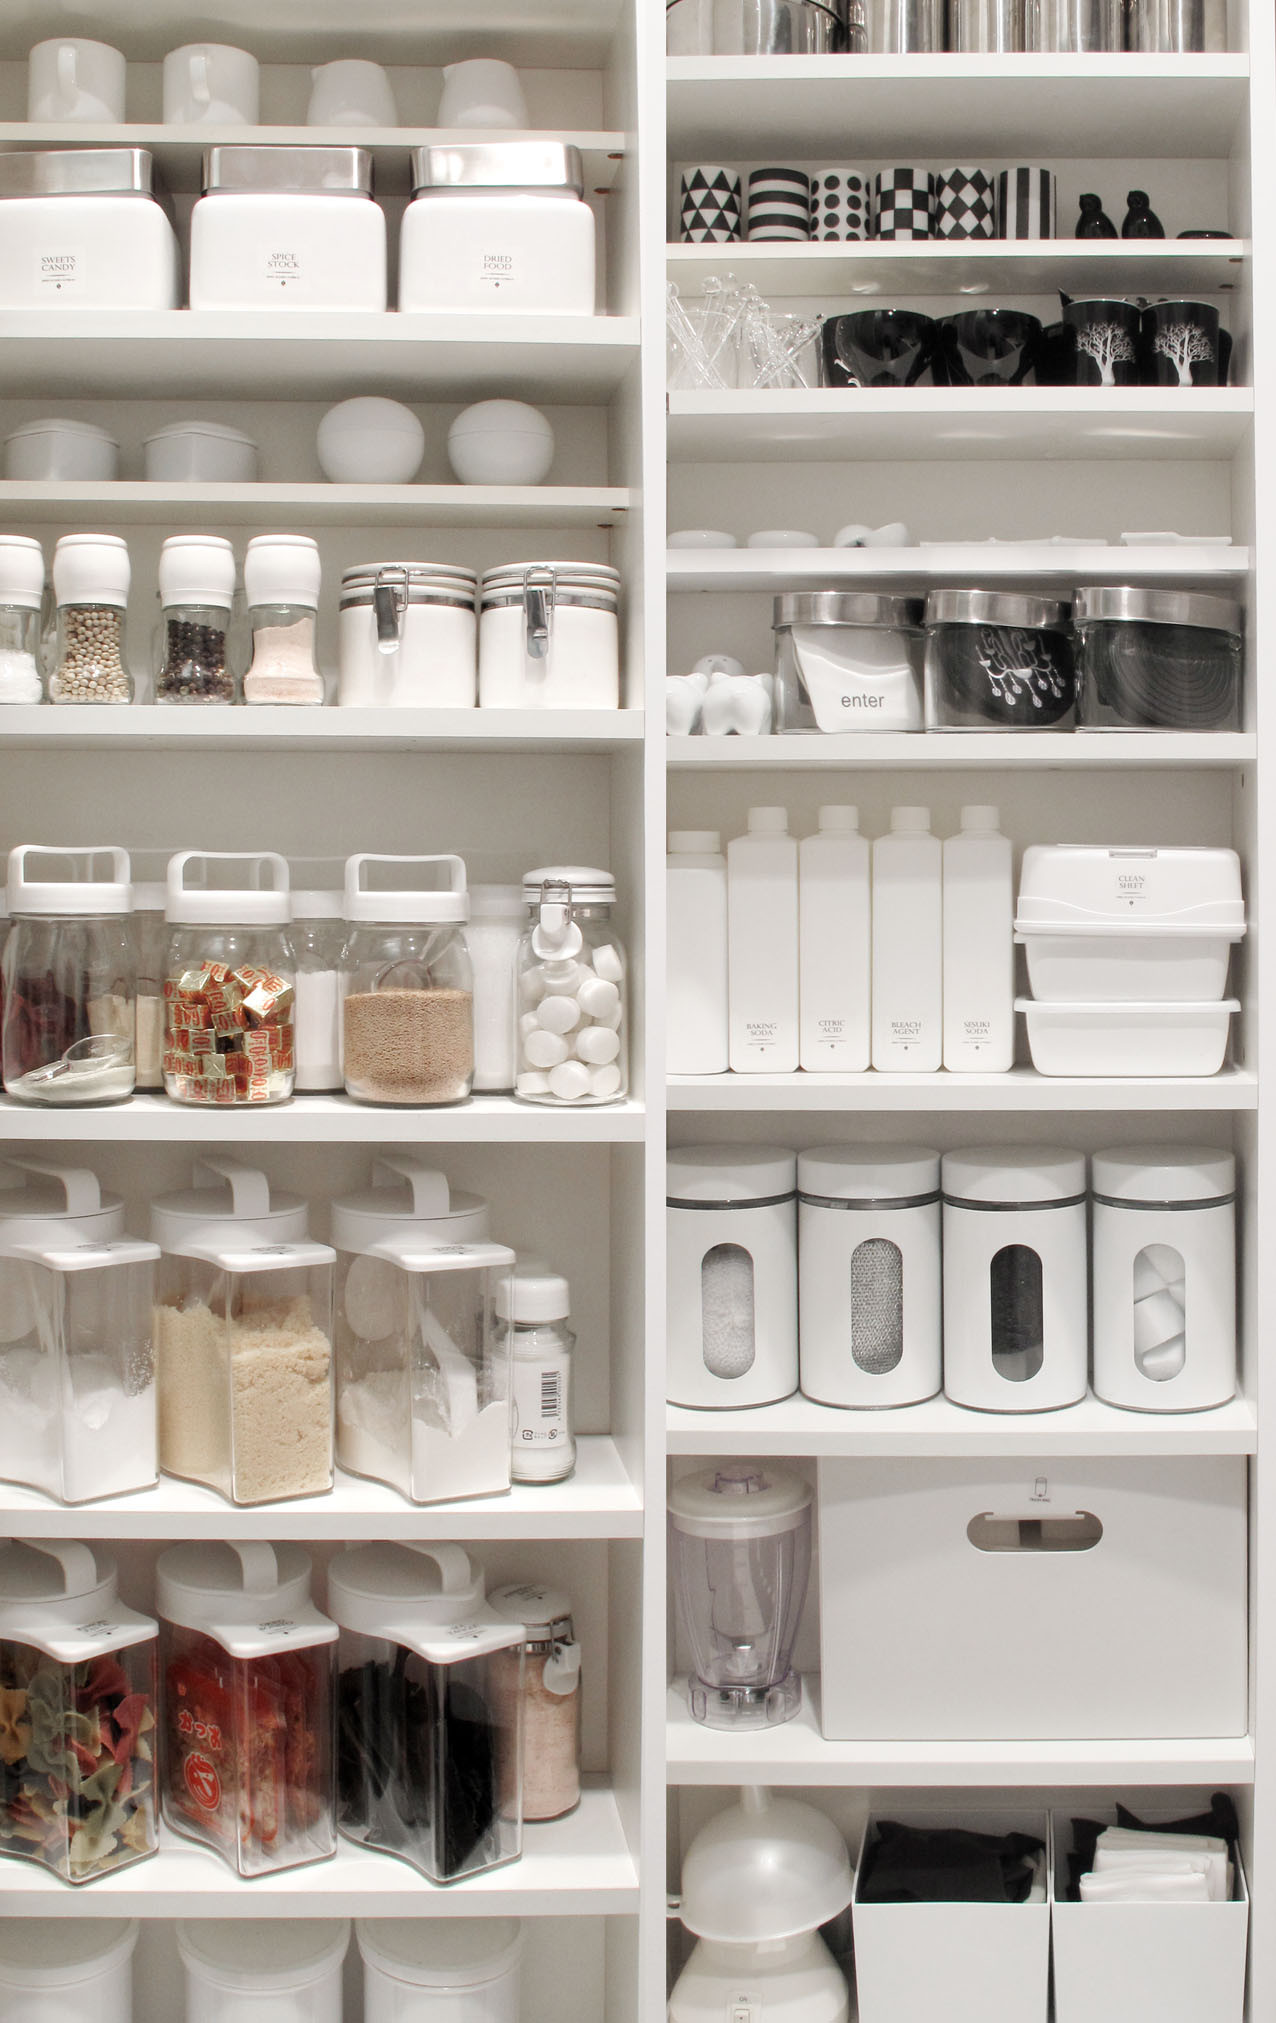 Kitchen Pantry Organizing Ideas
 Tips for a Perfectly Organized Pantry